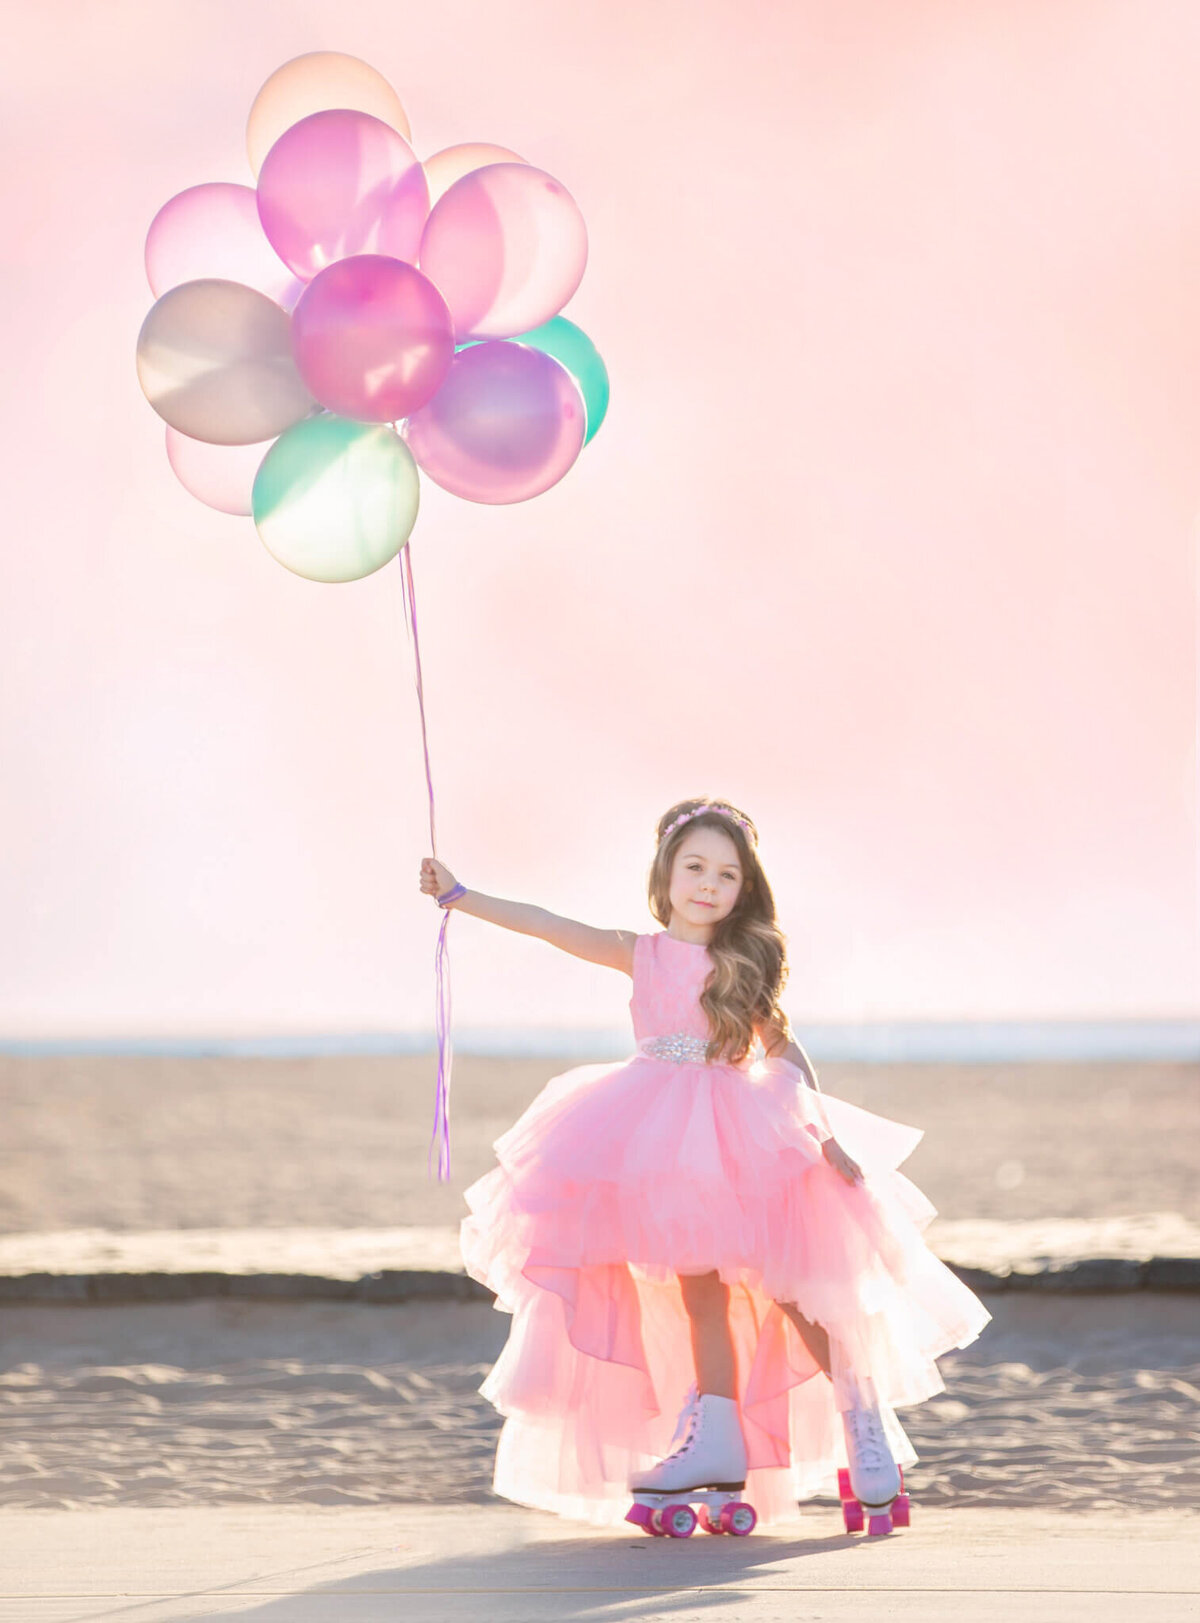 Little girl in roller skates at Santa Monica beach while holding balloons with a pink sky - Los Angeles Children’s Photographer Elsie Rose Photographer